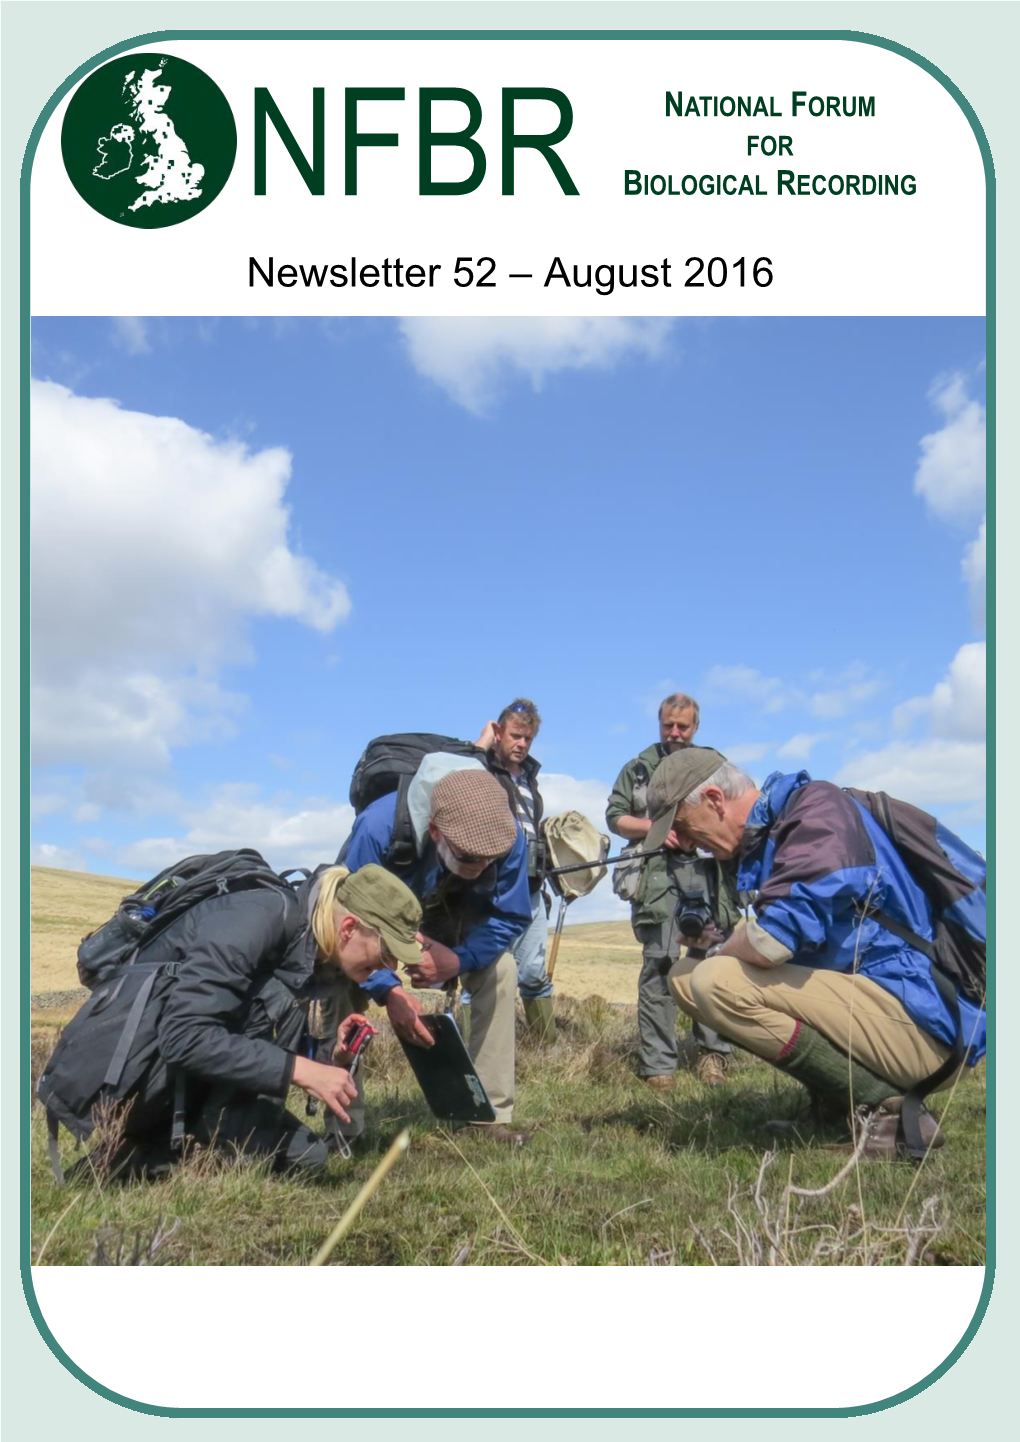 Newsletter 52 – August 2016 Contents